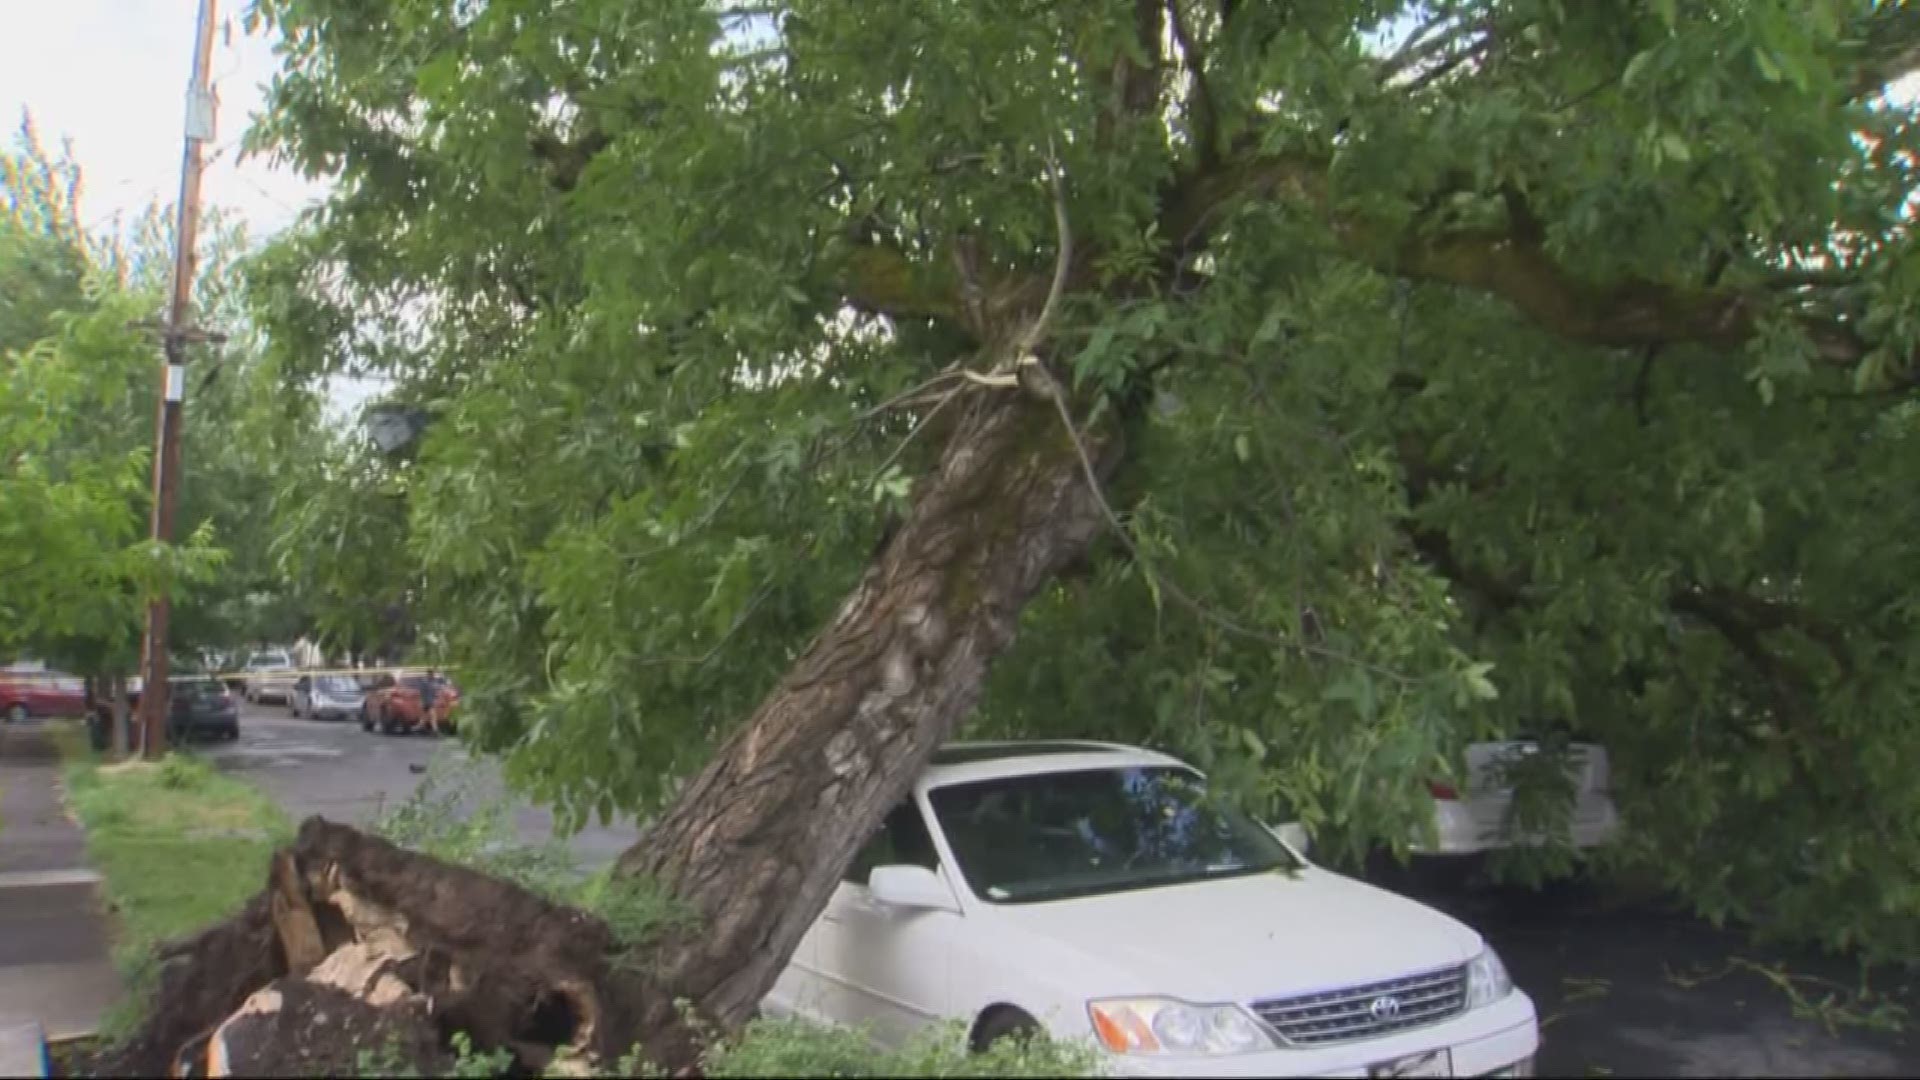 Crews were cleaning up damage Tuesday morning after a tornado touched down in NE Portland on Monday night.